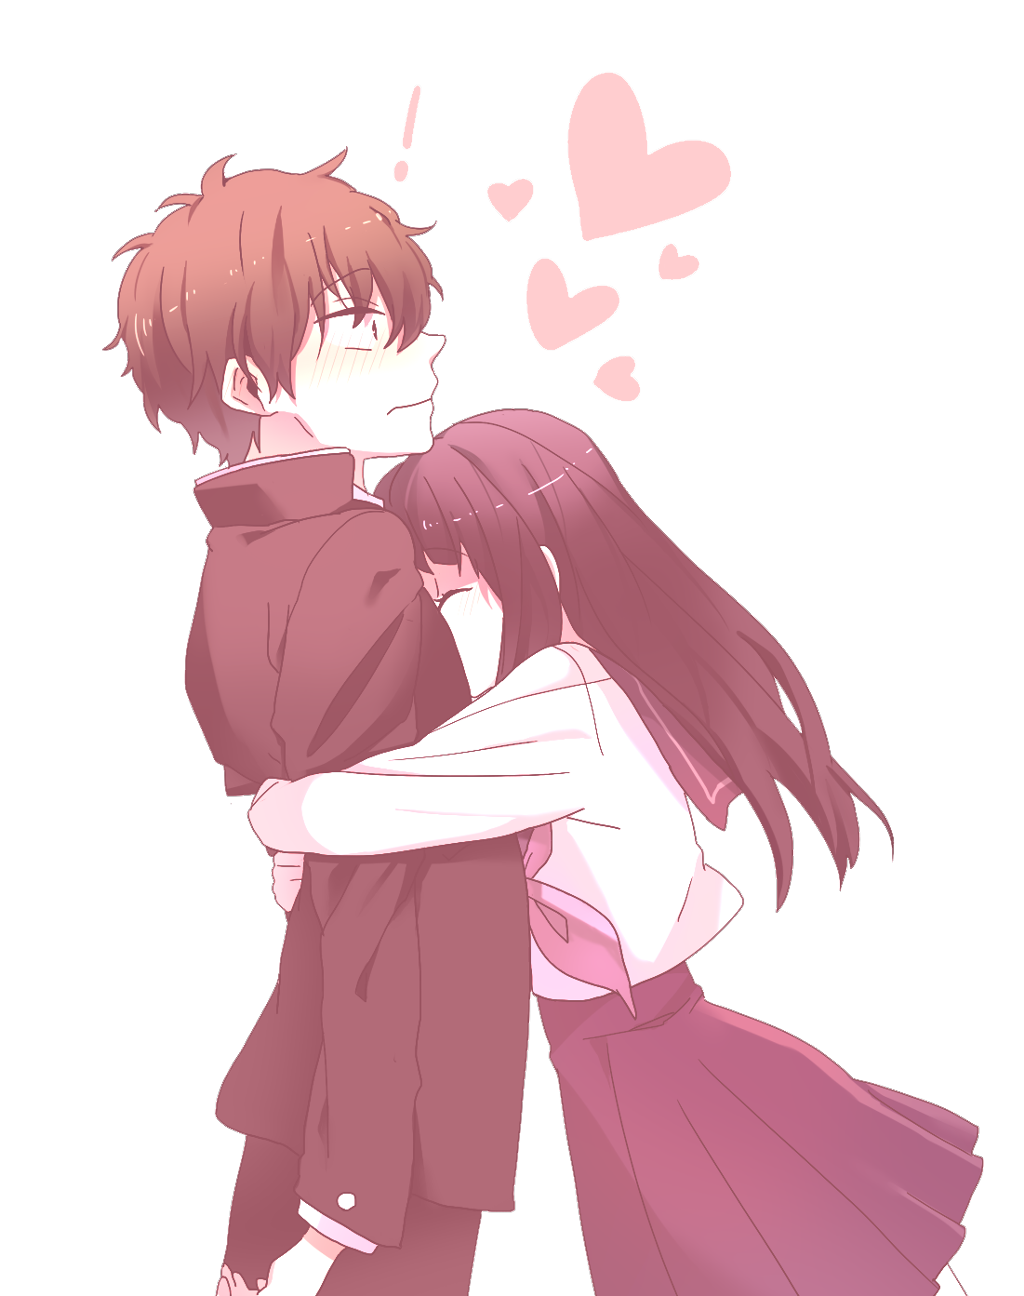 Download Cute Couple Anime PNG Free Photo HQ PNG Image FreePNGImg.